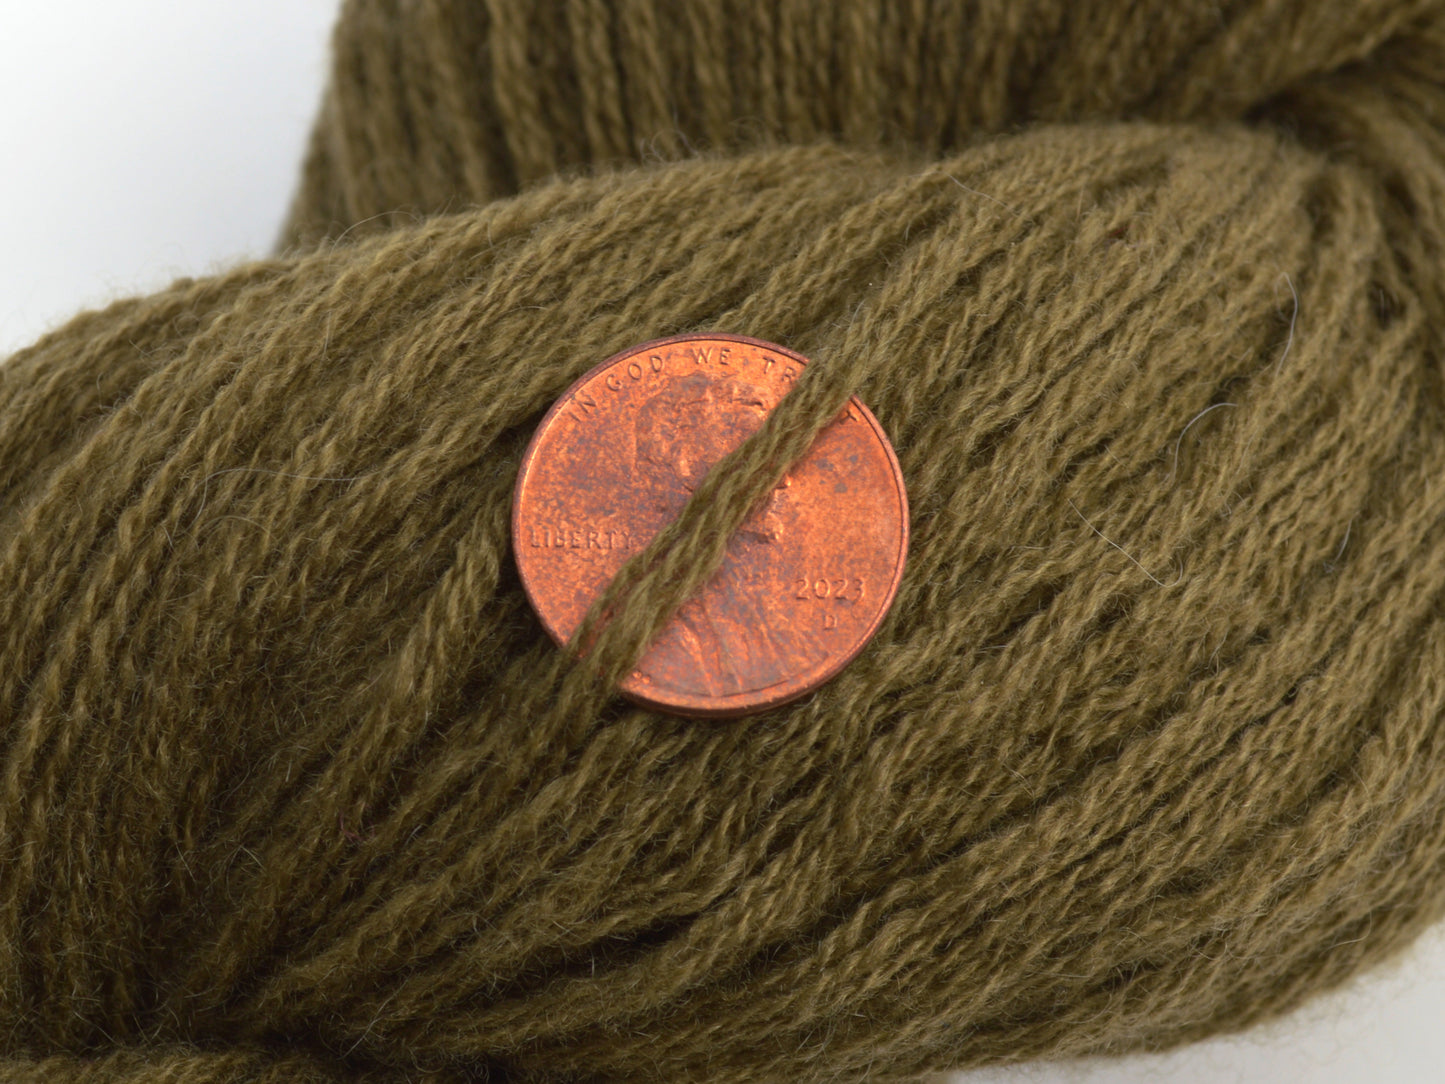 DK Weight Recycled Cashmere Yarn in Olive Green